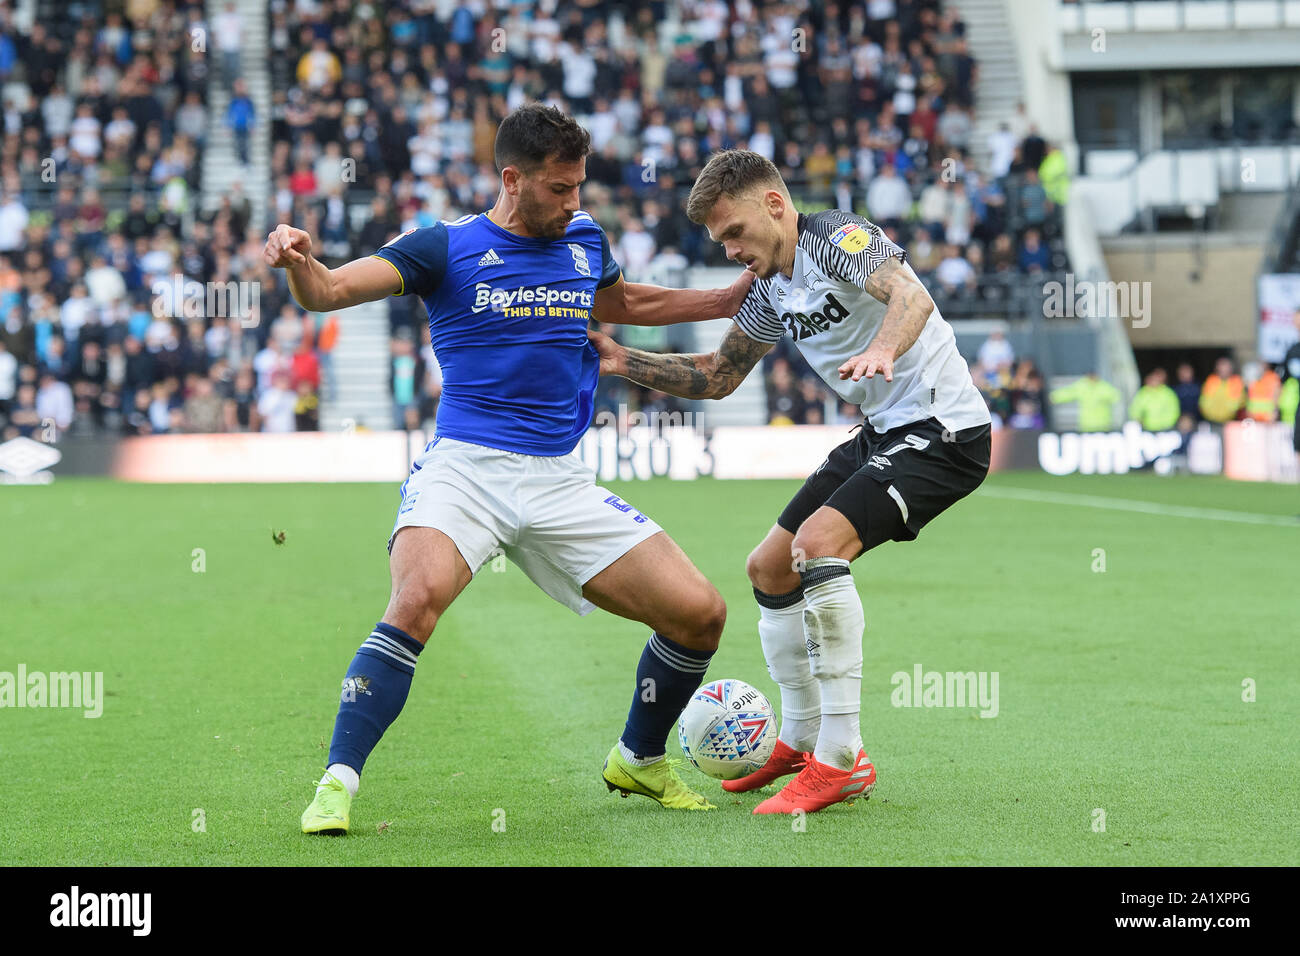 28th September 2019, Pride Park Stadium, Derby, England; Sky Bet Championship, Derby County v Birmingham City : Maxime Colin (5) of Birmingham City battles with Jamie Paterson (7) of Derby County  Credit: Jon Hobley/News Images Stock Photo